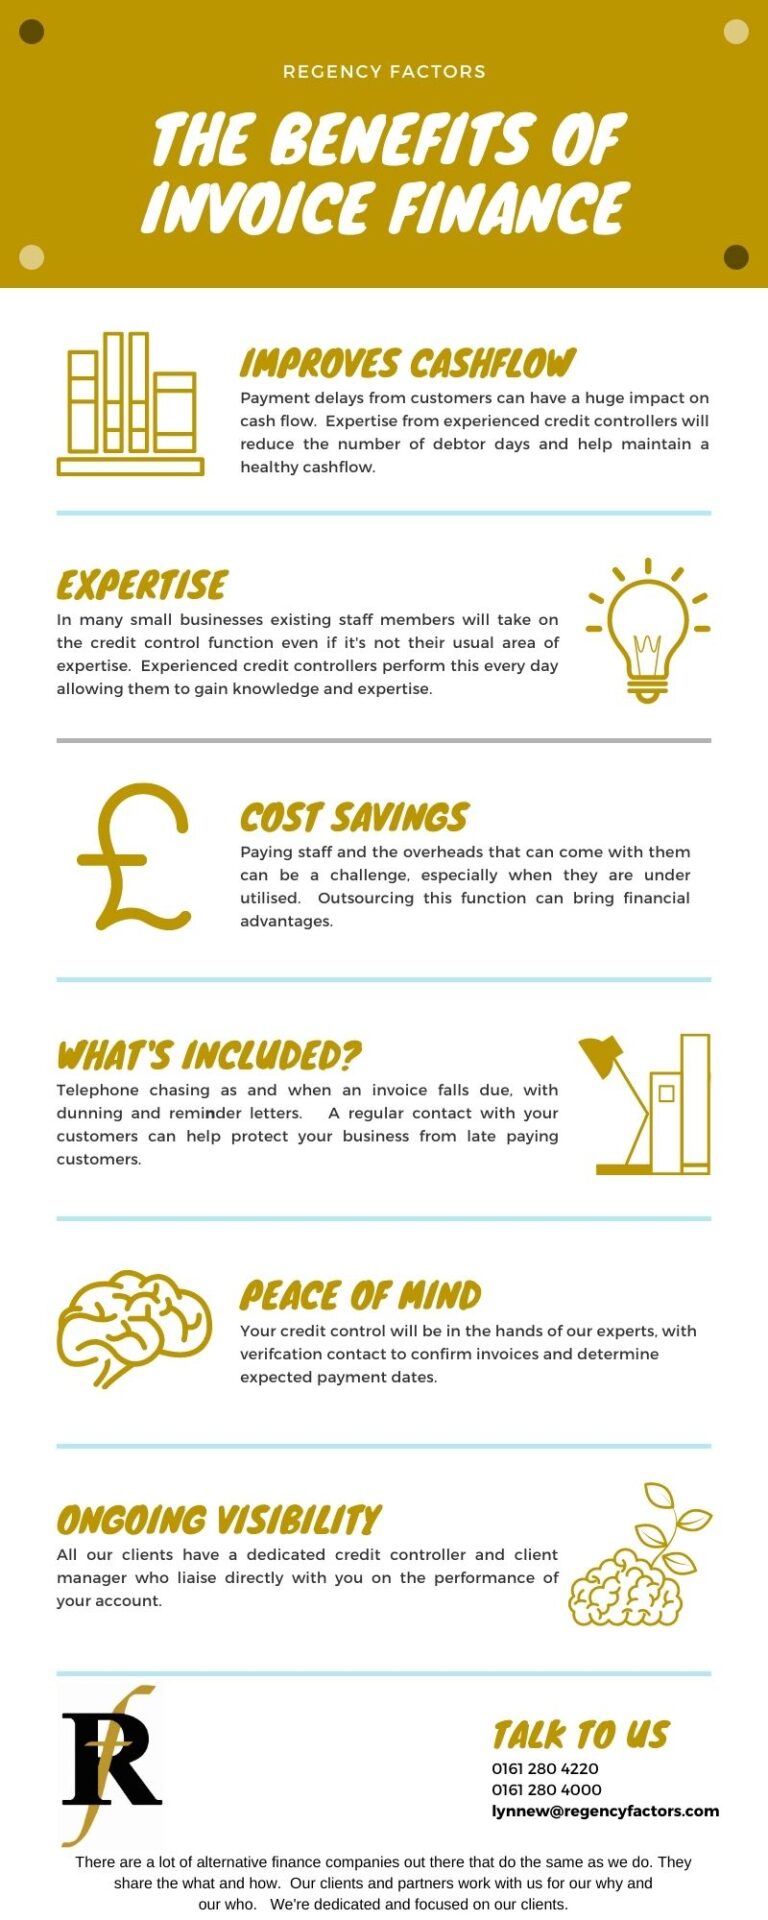 Things you should know about Invoice Finance {Infographic} Regency Factors